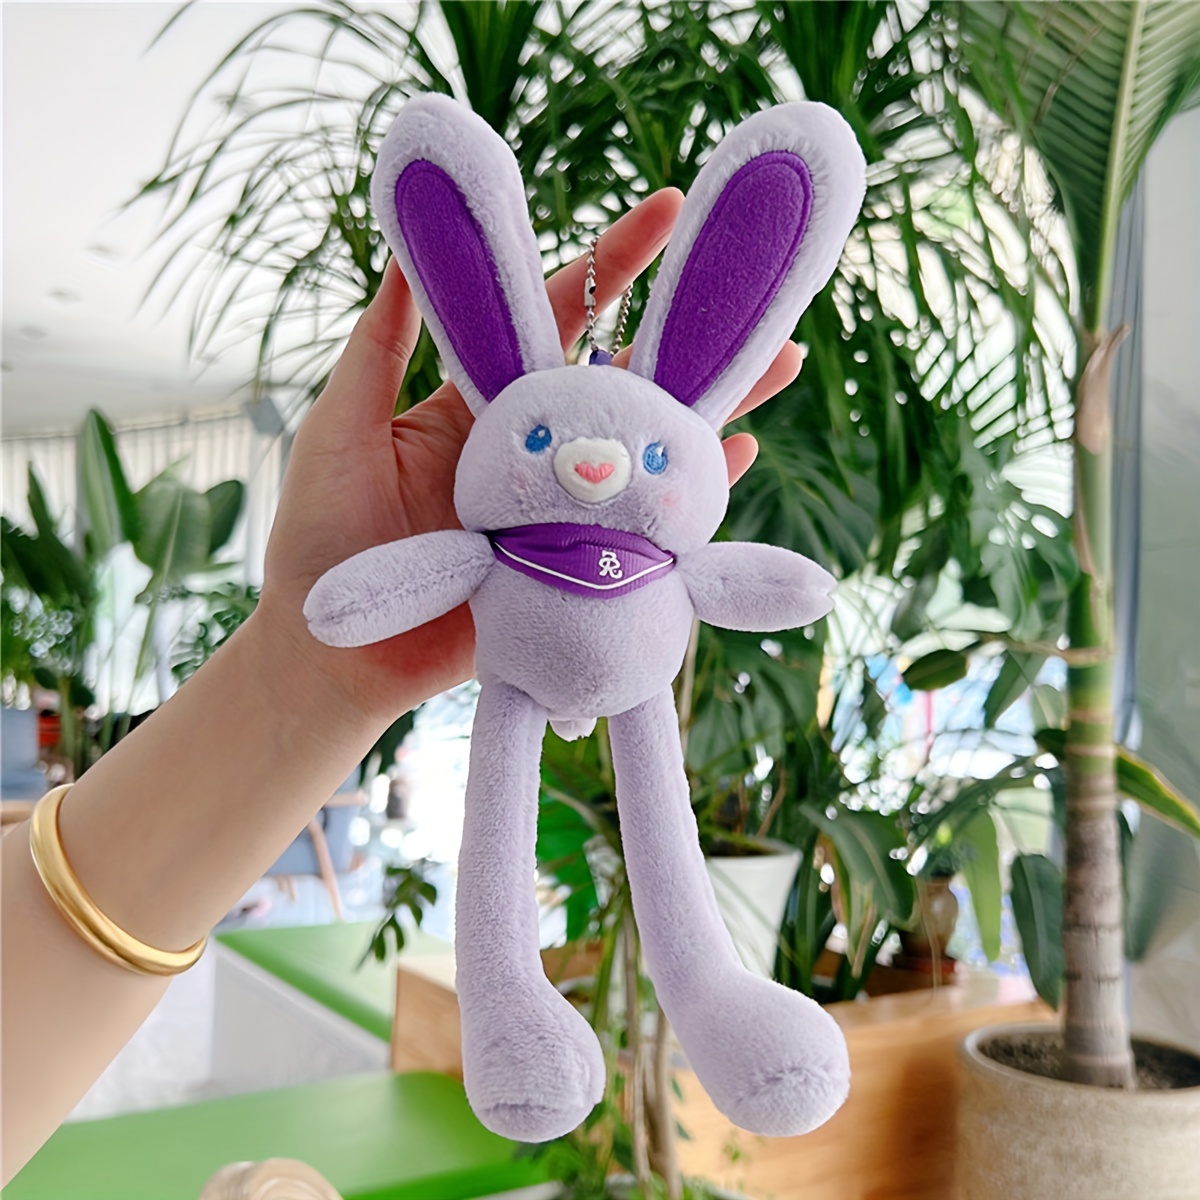  Plush Toy Withered Purple Bunny Fan Made Teddy Bear Bonnie  Plush, Game Toy Gift Animal plushie, 11in : Toys & Games